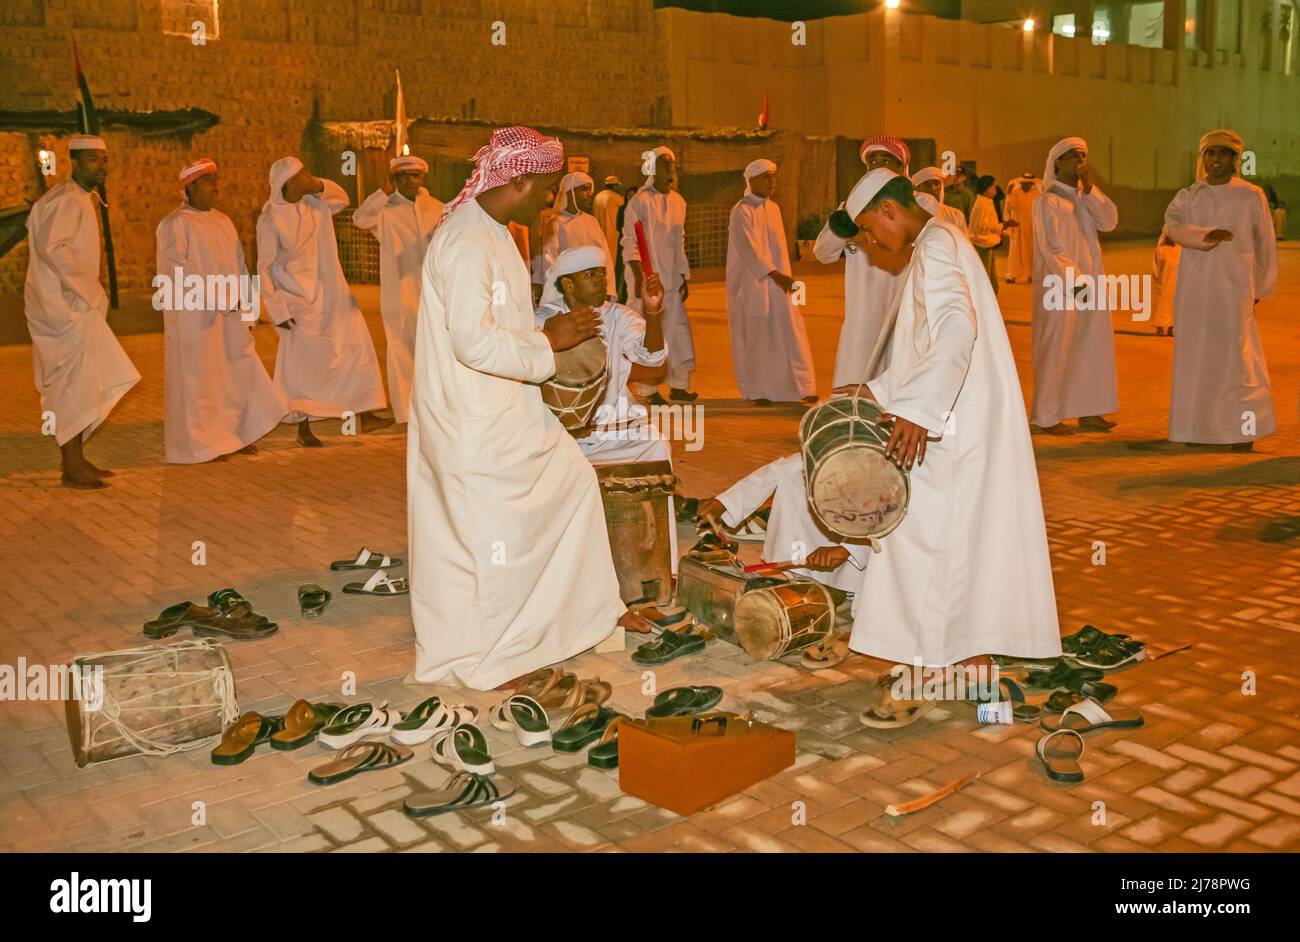 A group of Arab male dancers and musicians performing a folk dance during Sharjah's Heritage Days Festival. Stock Photo